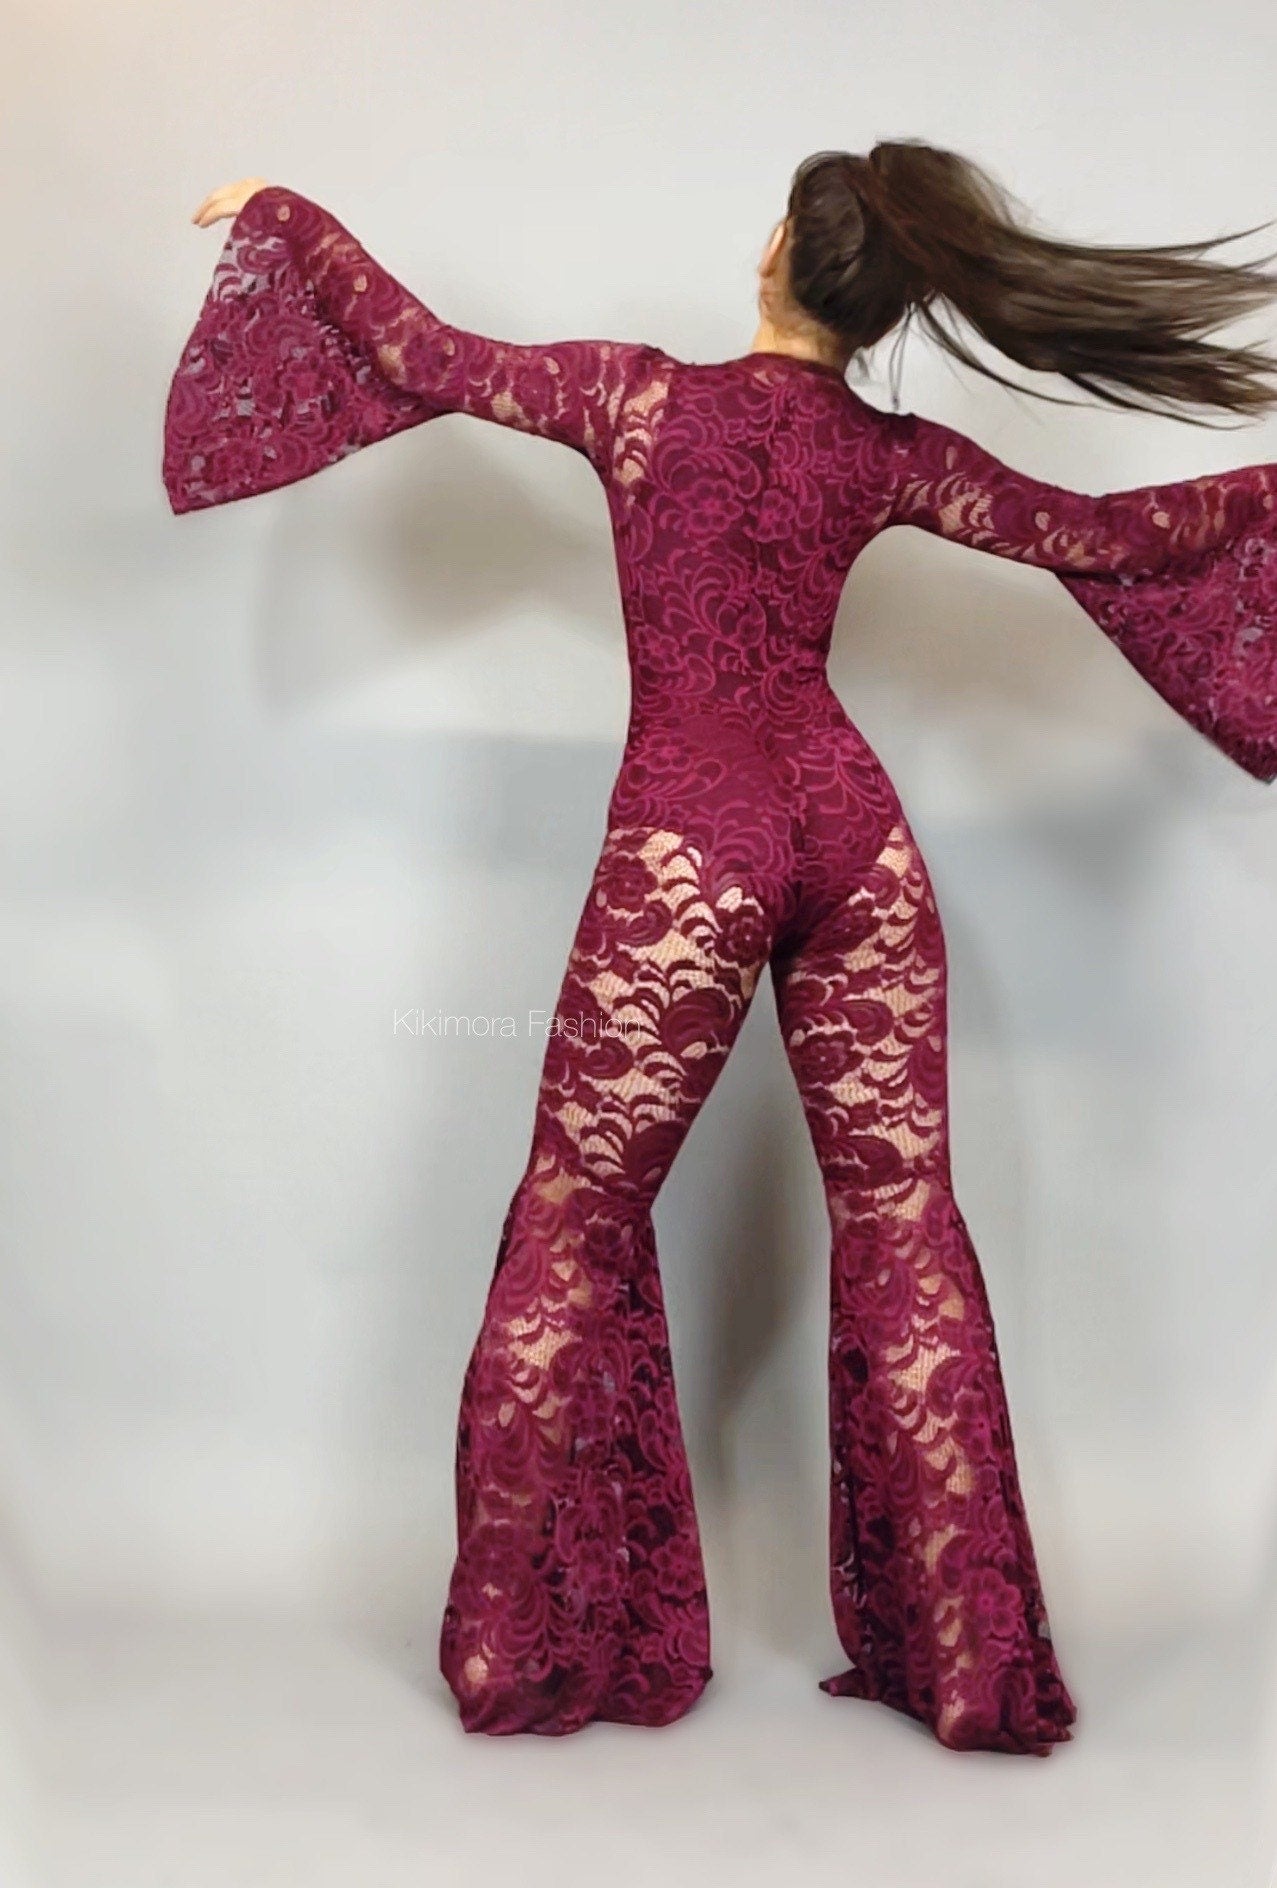 Sheer Jumpsuit, Cher Costume, Beautiful Lace Costume, Festival Outfit, Trending Now